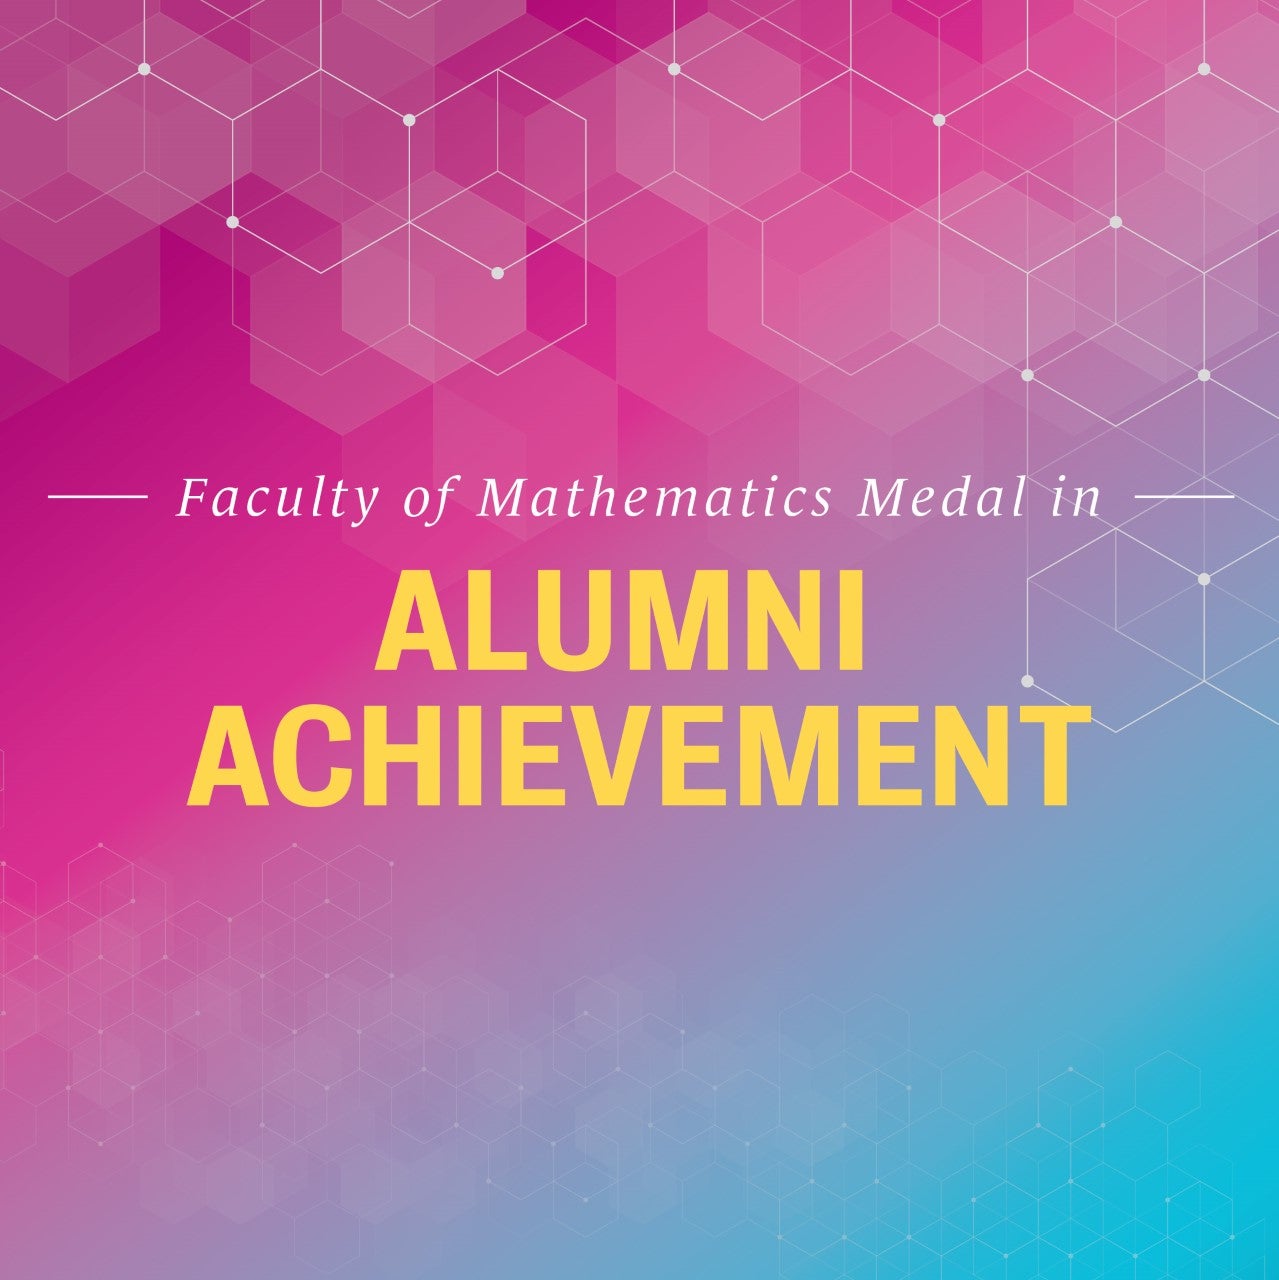 Alumni achievement banner with pink, gold, teal with hexagons